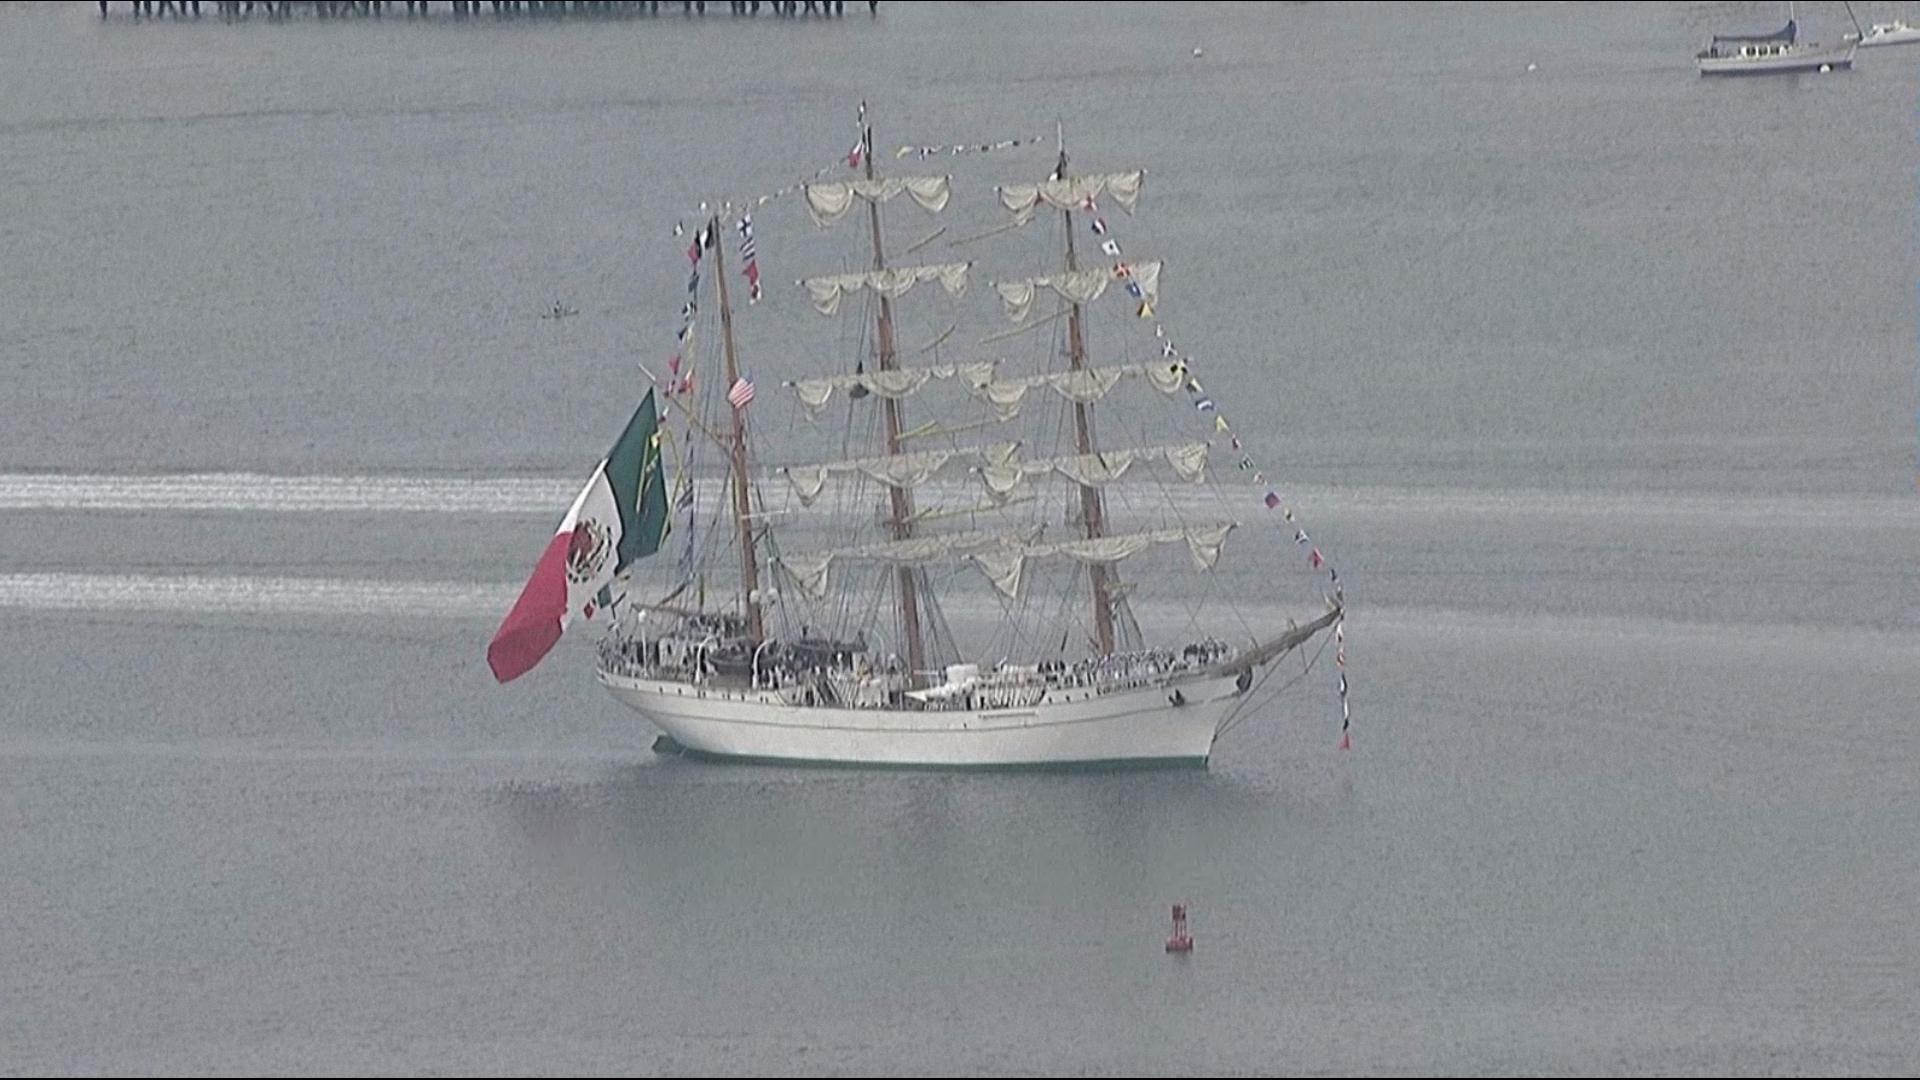 Aerials above the Tall Ship ARM “Cuauhtémoc” as it arrives in San Diego. The historical Mexican Navy ship will be open to the public to view May 17-20